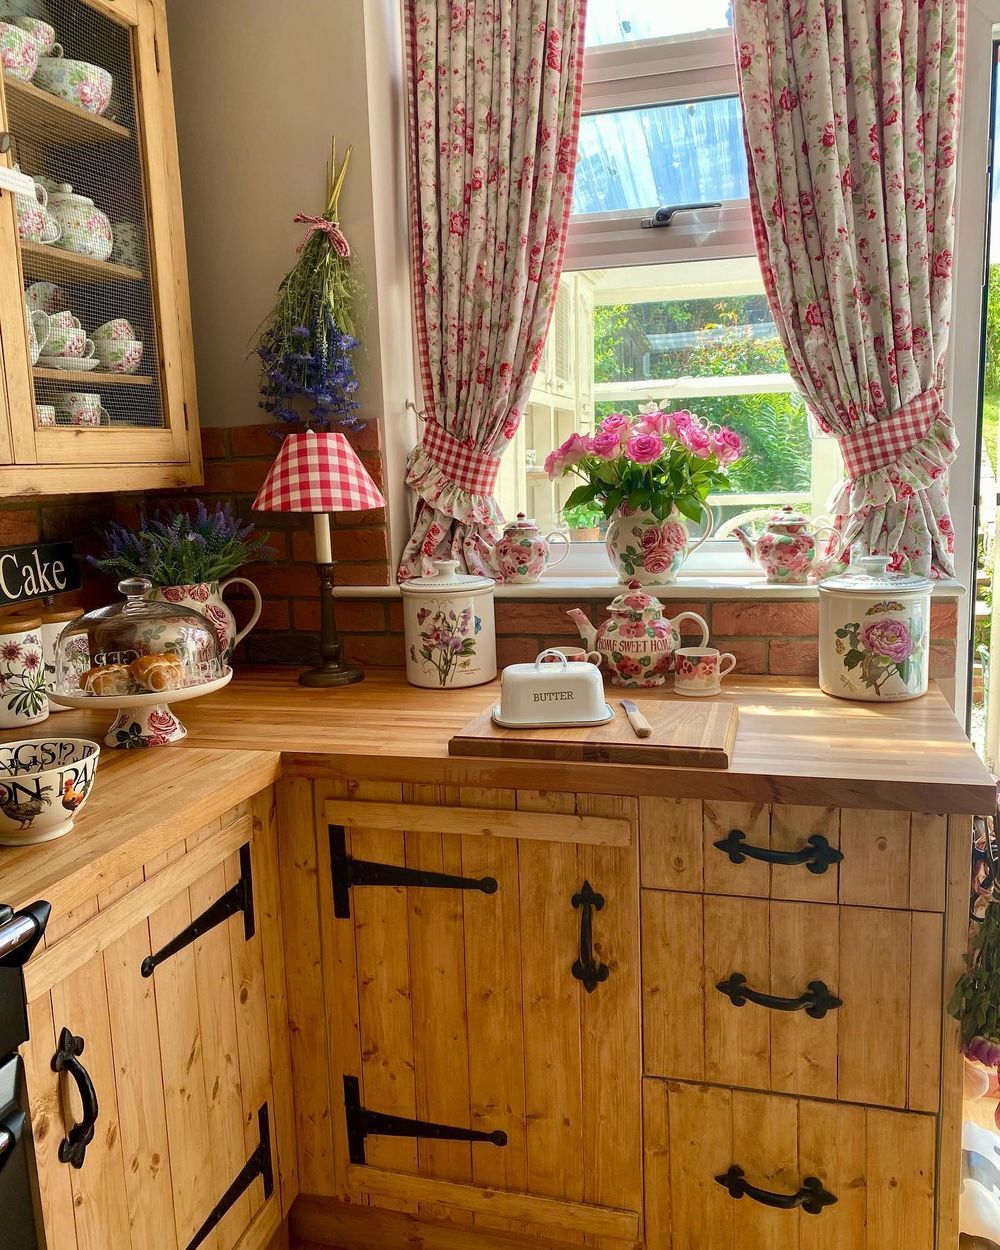 Creating a country cottage look in your home